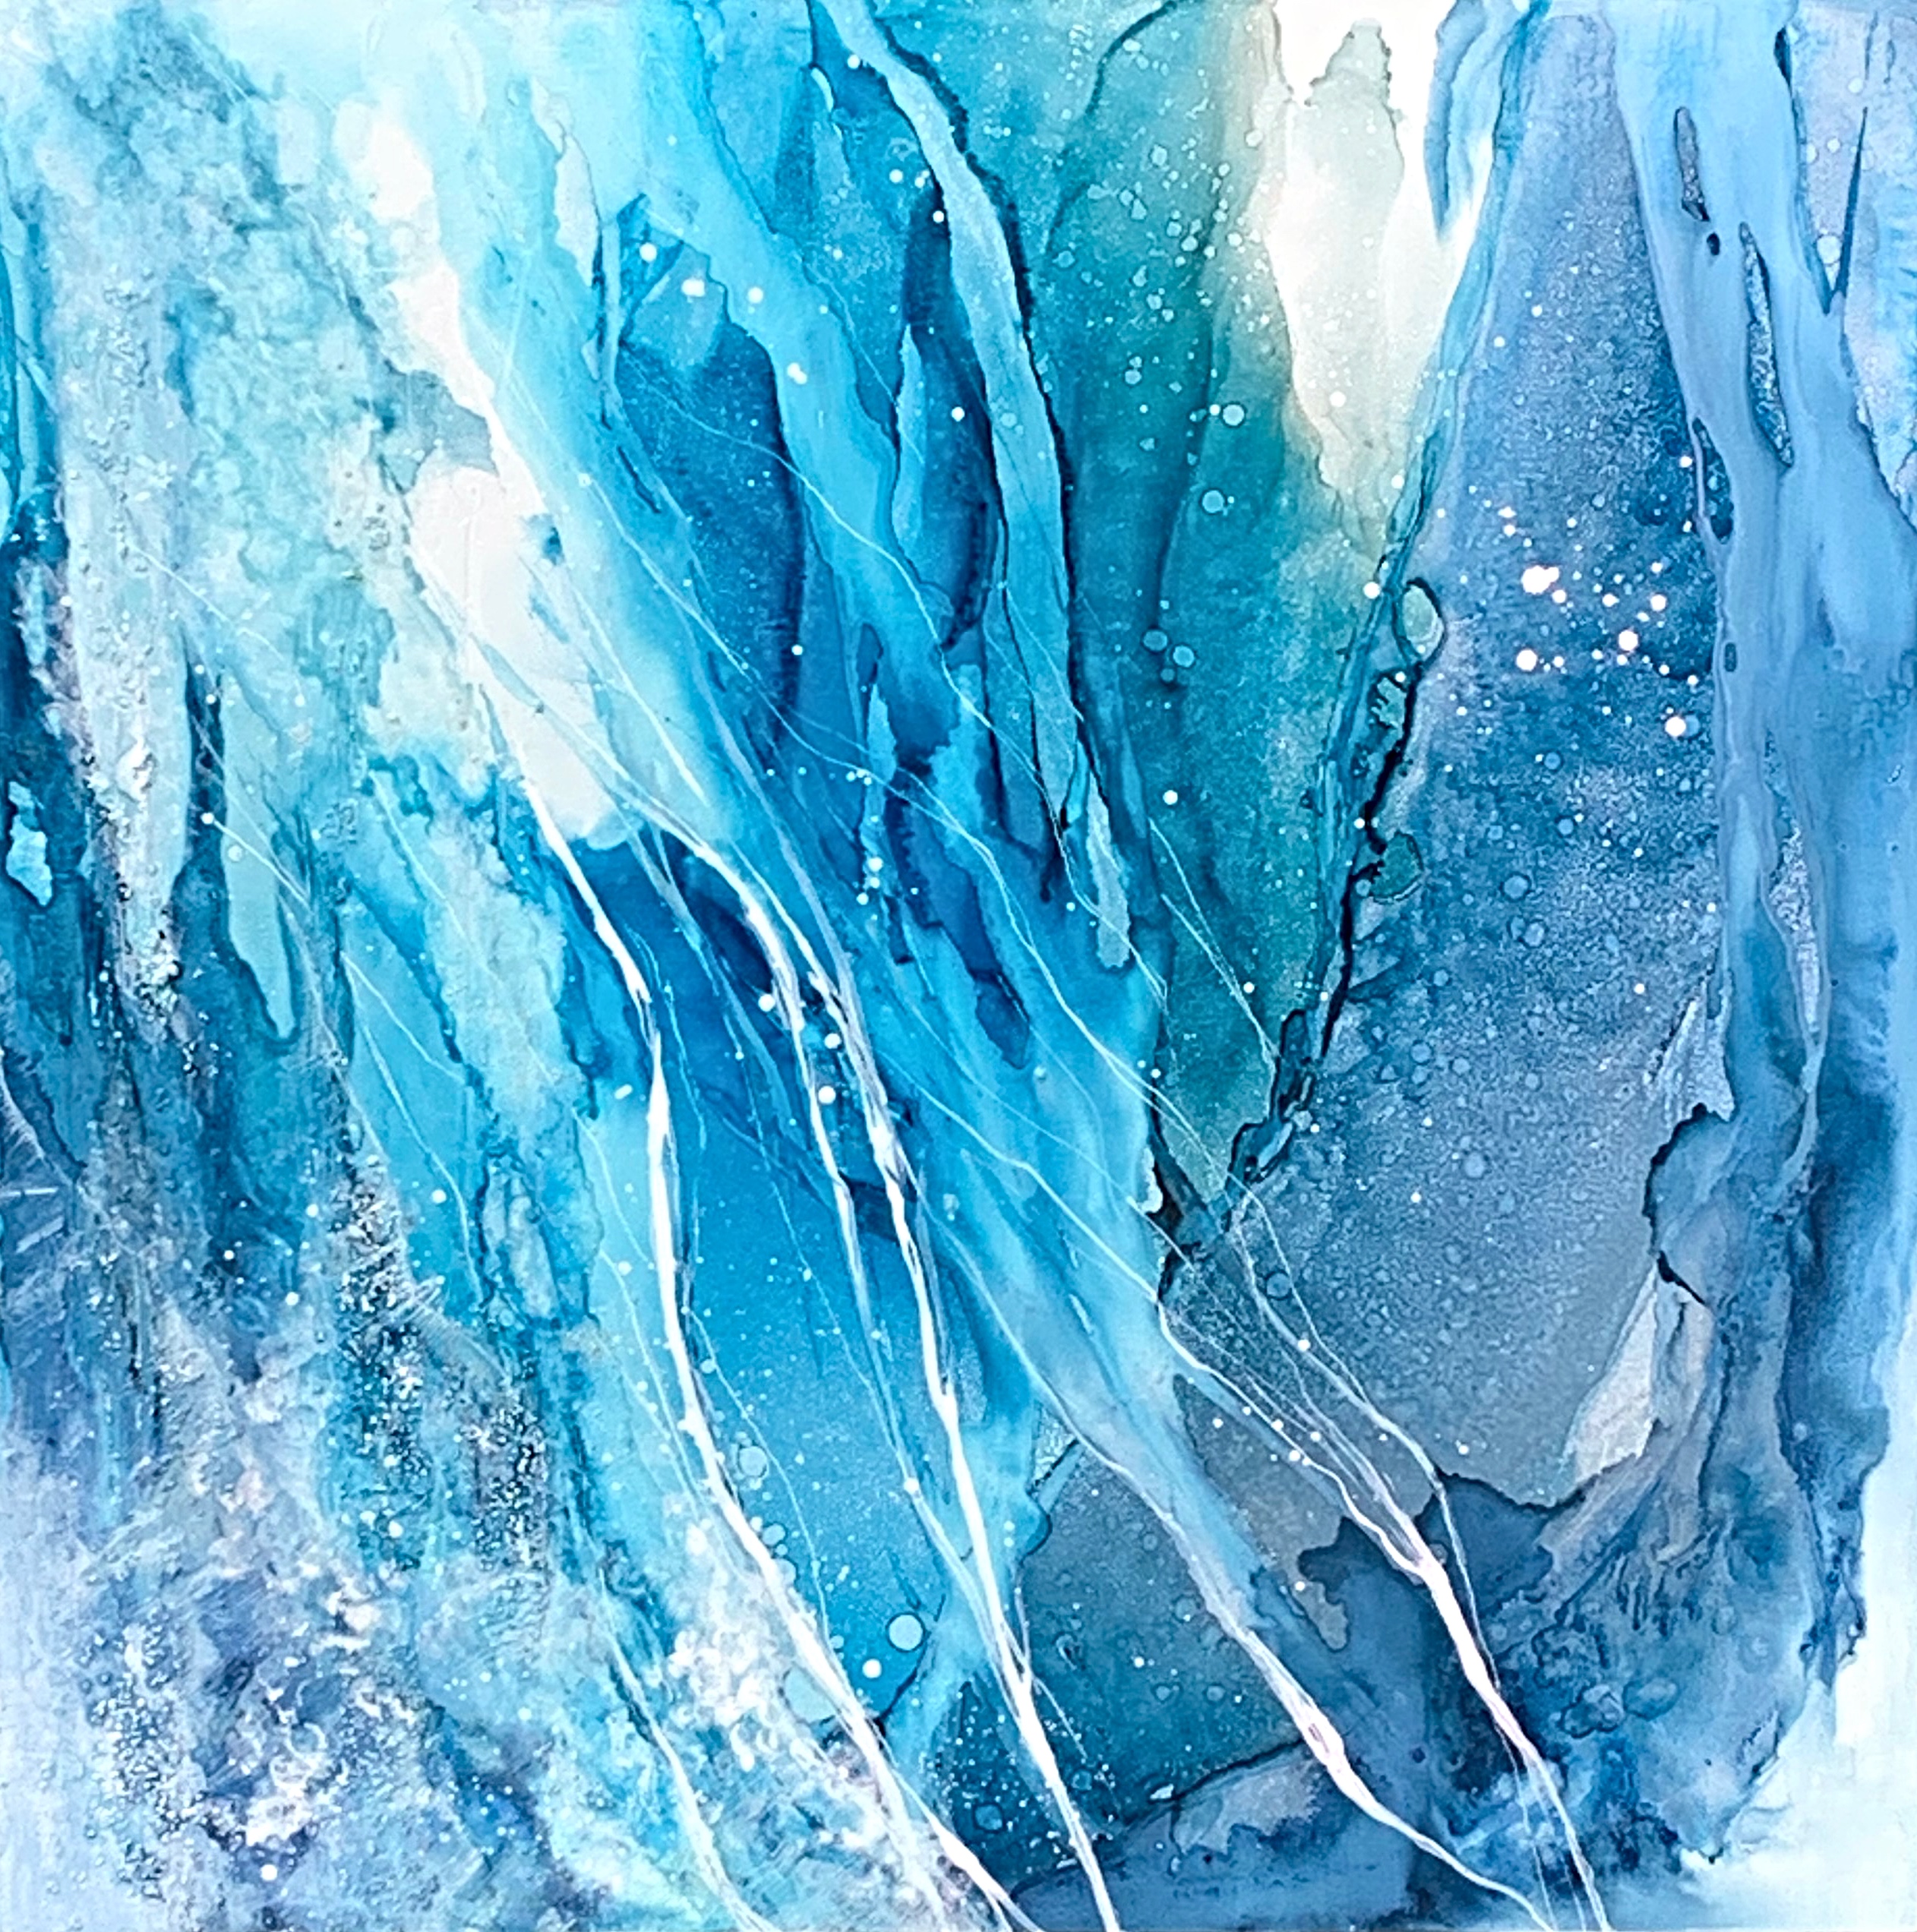 Catching a Glimpse of Magic 1, alcohol ink icy abstract painting by Paulina Tokarski | Effusion Art Gallery in Invermere BC